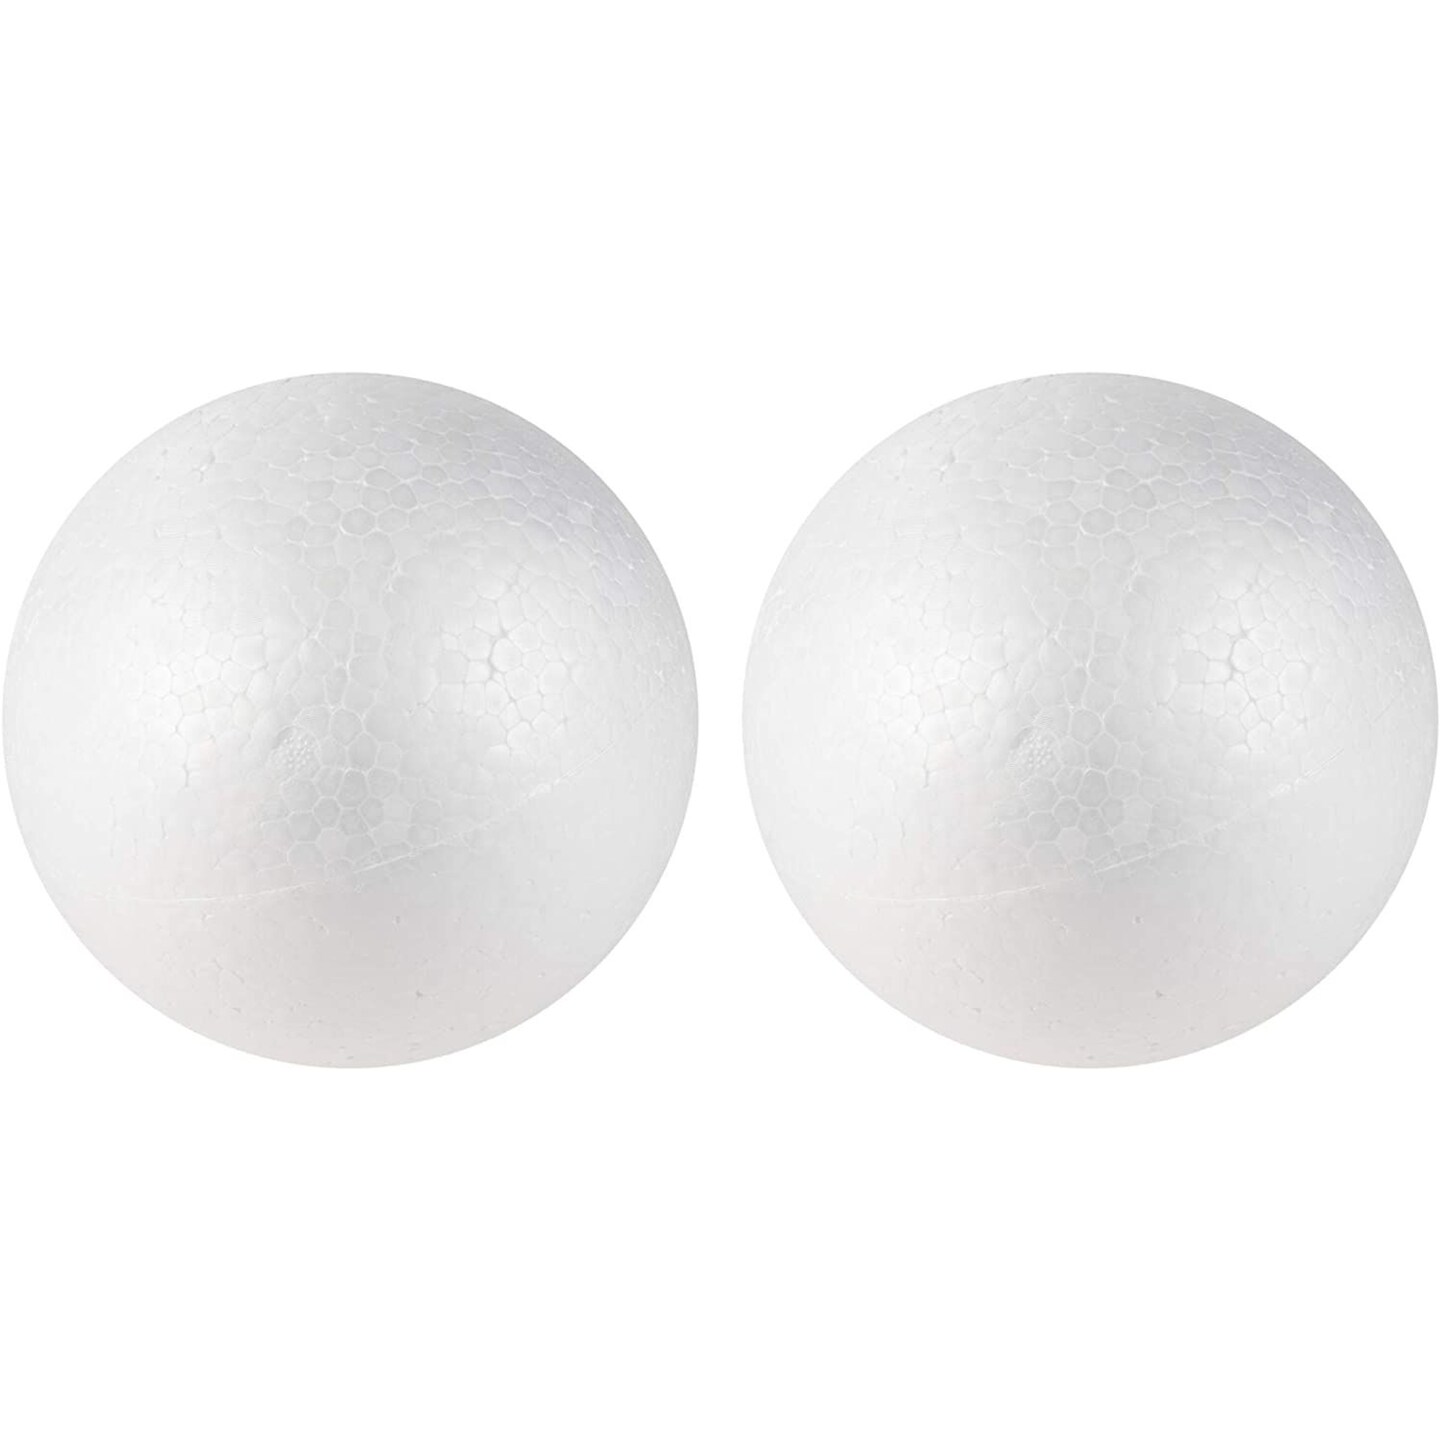 Foam Balls for Kid's Arts and Crafts, DIY Projects (6 In, 2 Pack)